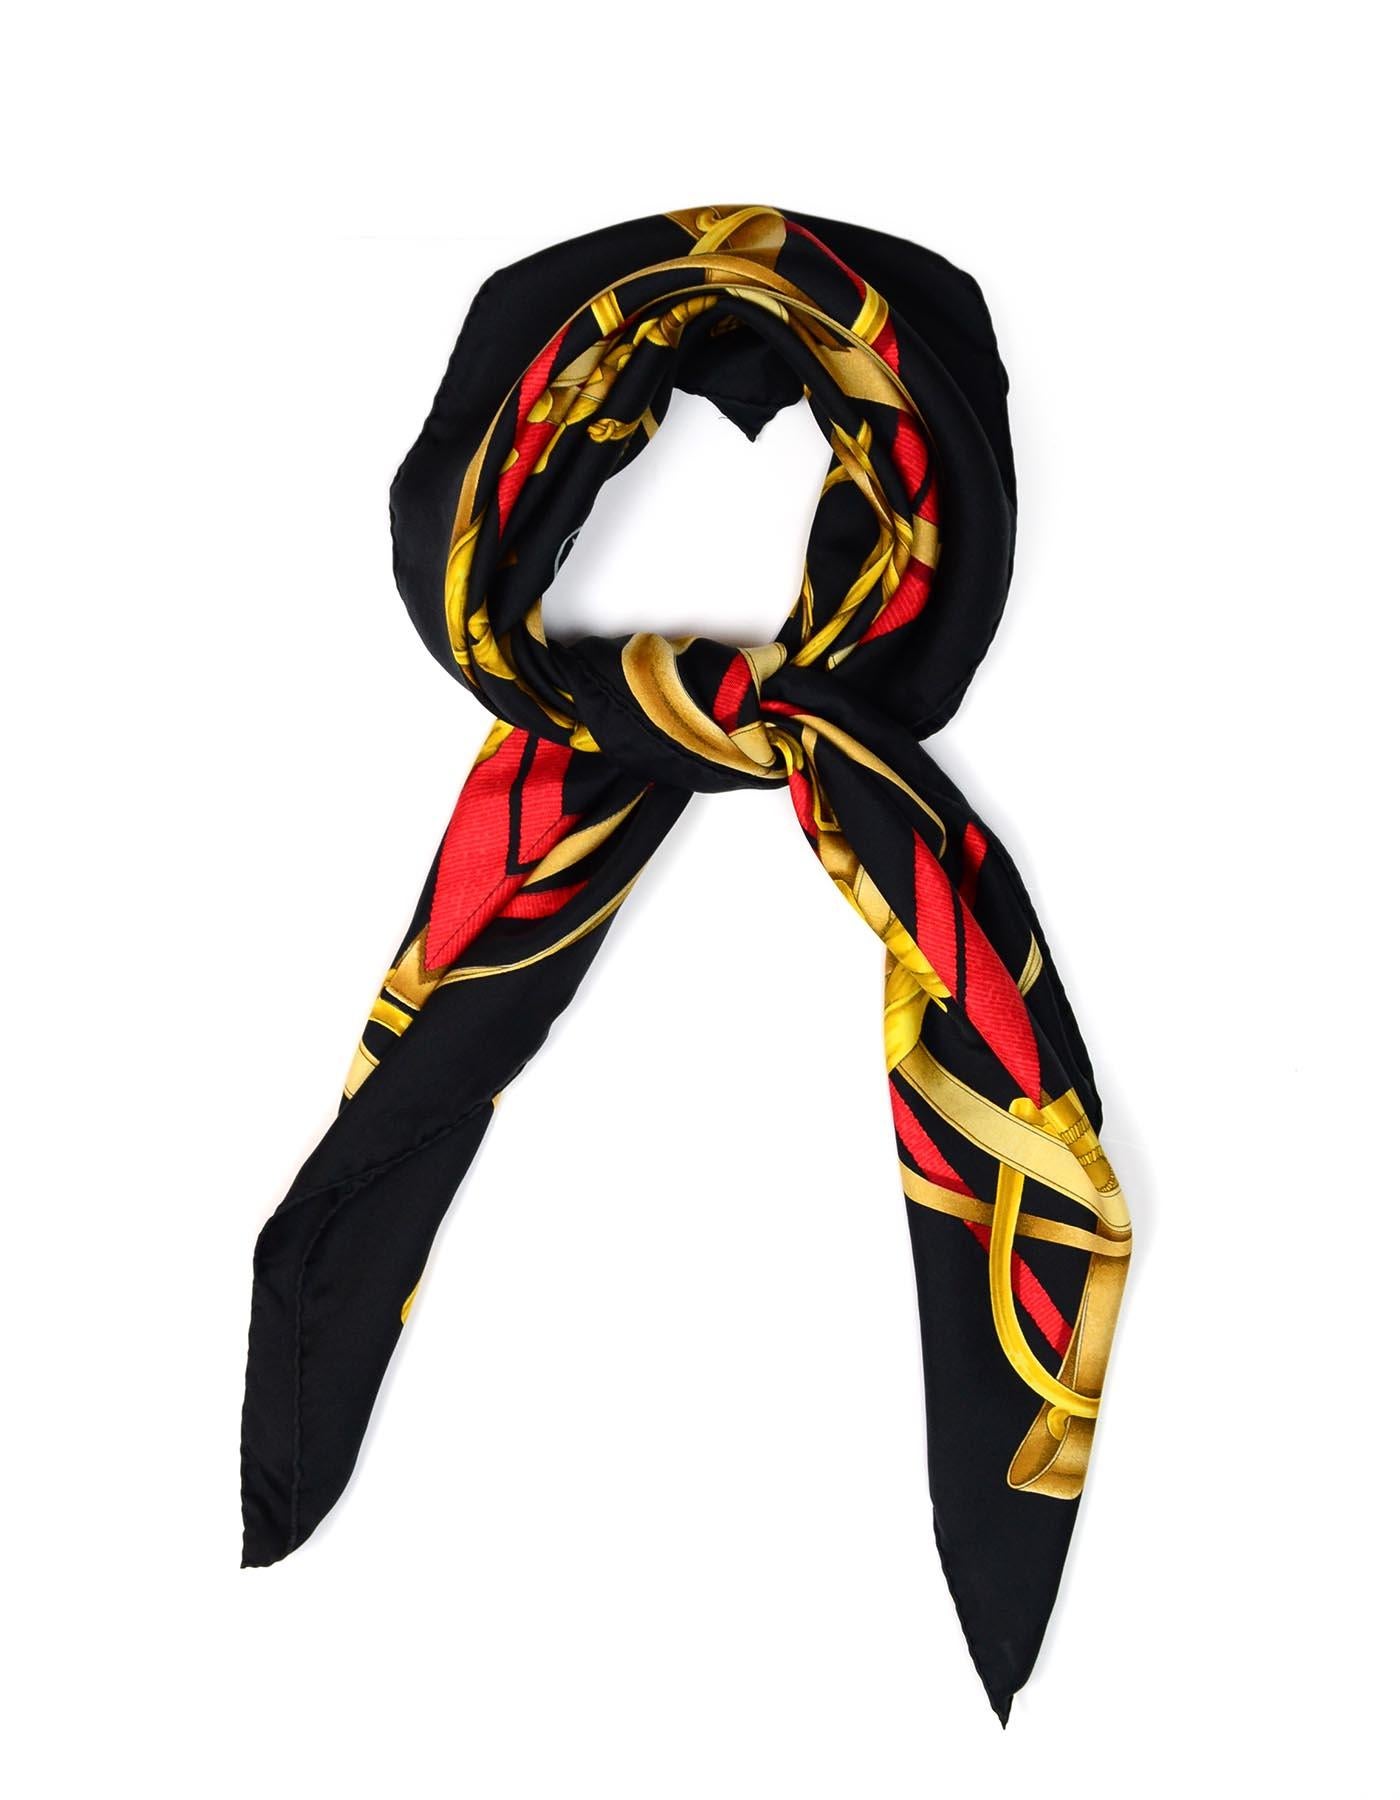 Hermes Red/Black/Gold Grand Manege 90cm Silk Scarf
Print by H dOrigny

Made In: France
Color: Red/black/gold
Materials: 100% silk (no composition tag)
Overall Condition: Excellent pre-owned condition with exception of water mark
Estimated Retail: